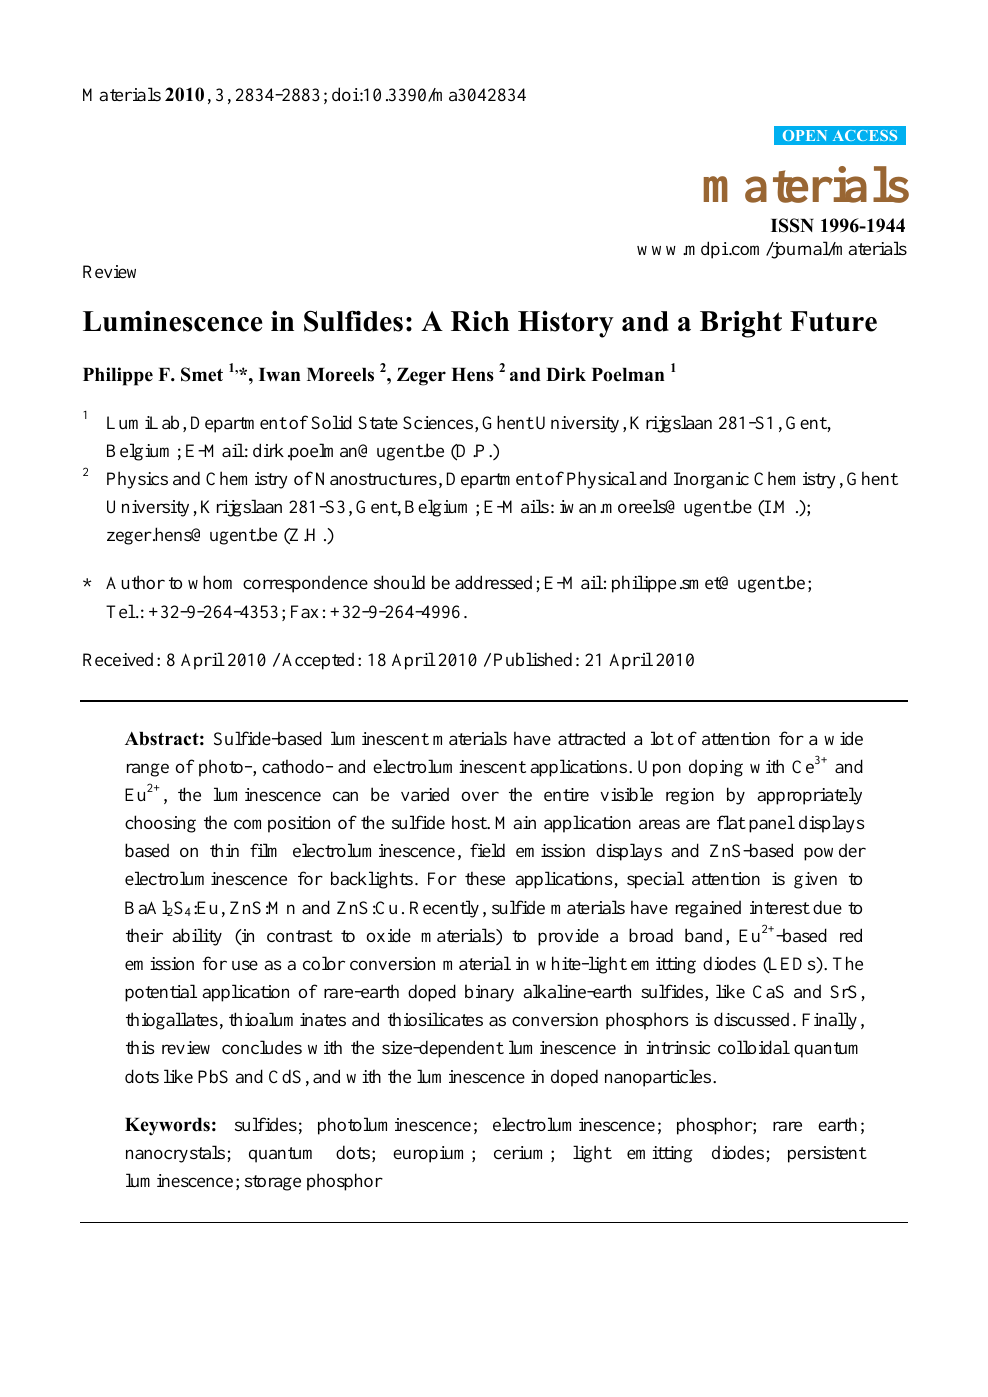 Luminescence in Sulfides: A Rich History and a Bright Future – topic of  research paper in Nano-technology. Download scholarly article PDF and read  for free on CyberLeninka open science hub.